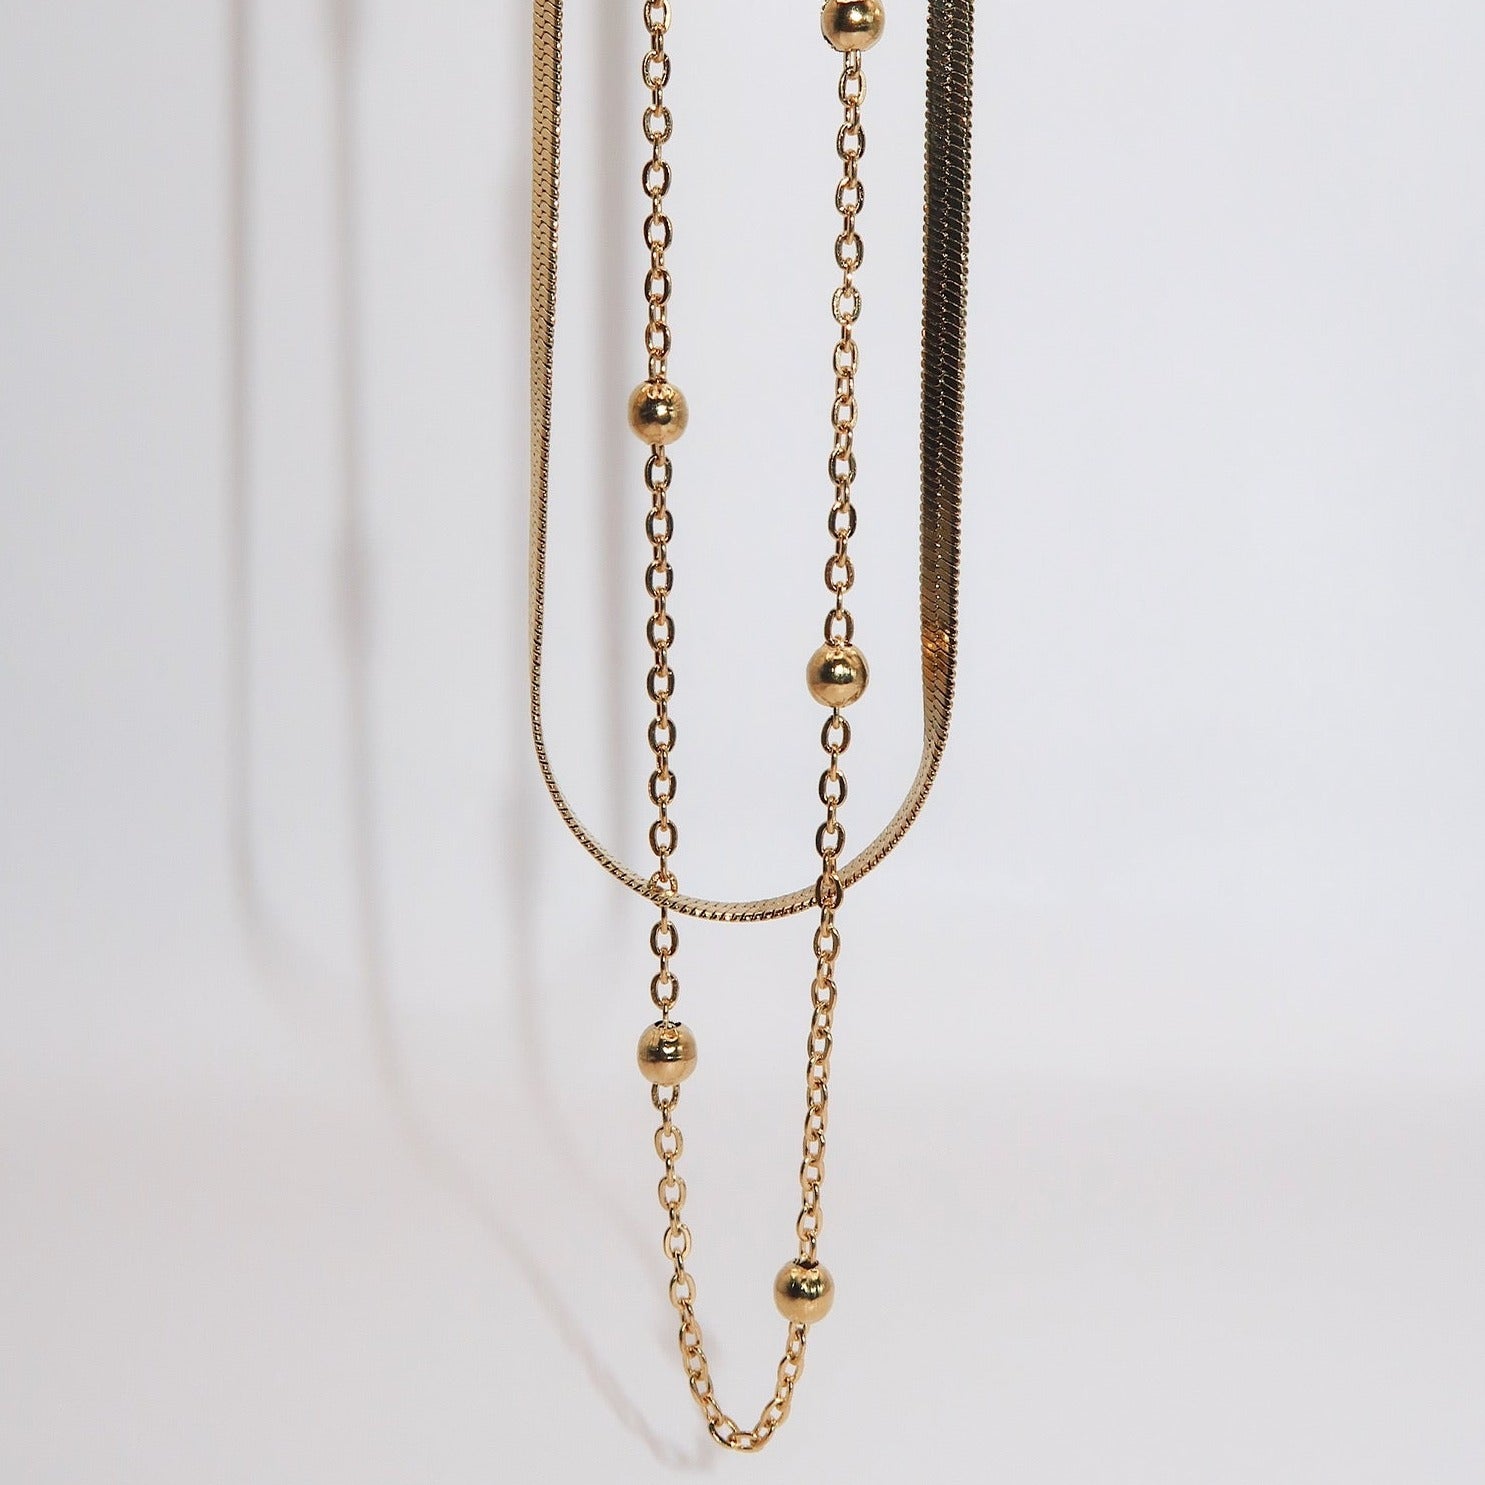 GRACE - 18K PVD Gold Plated Double Layered Necklace w/Gold Bead Detail - Mixed Metals